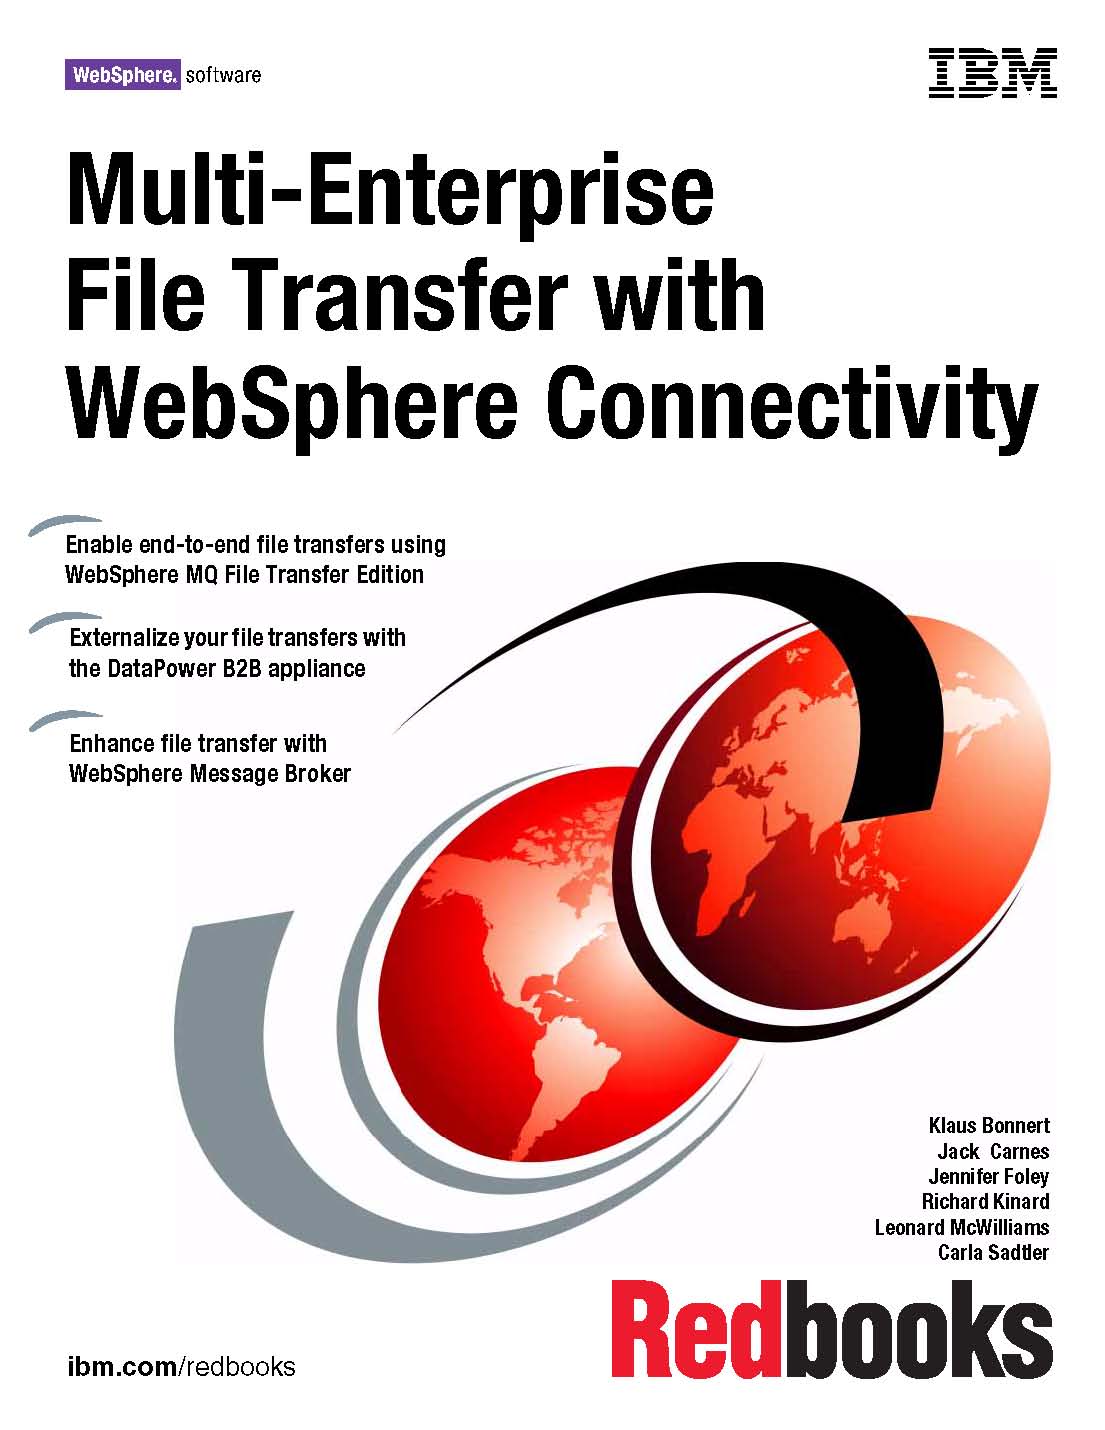 Multi-Enterprise File Transfer with WebSphere Connectivity